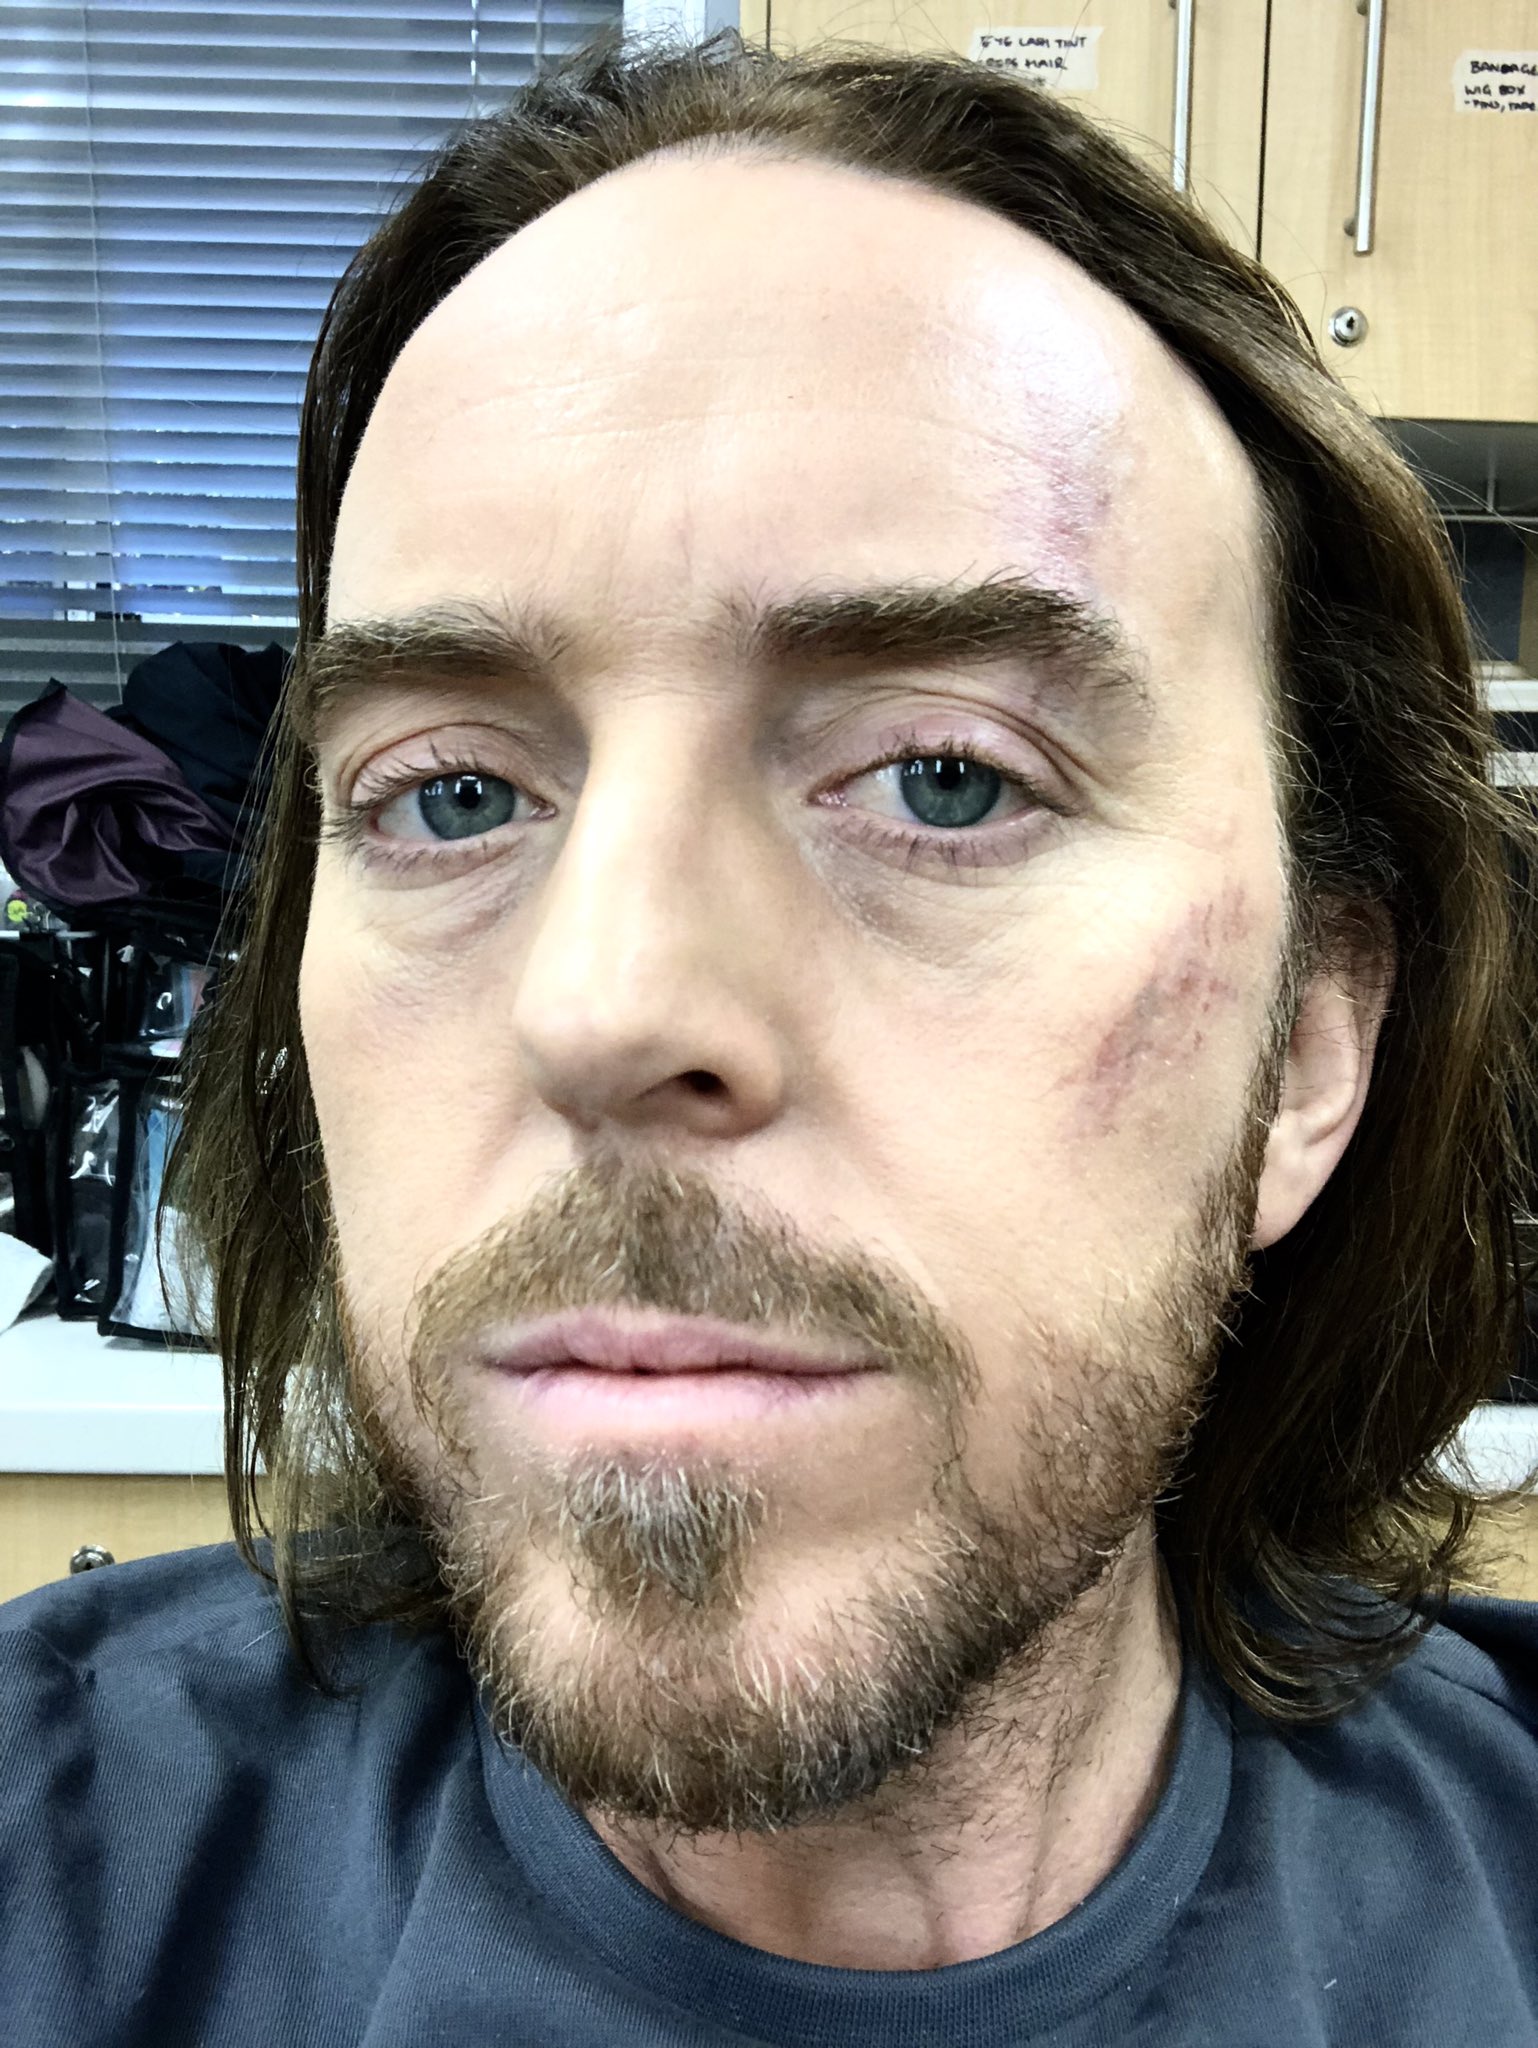 Tim Minchin on Twitter: "@natalietran *gasp* all I've done for you. /